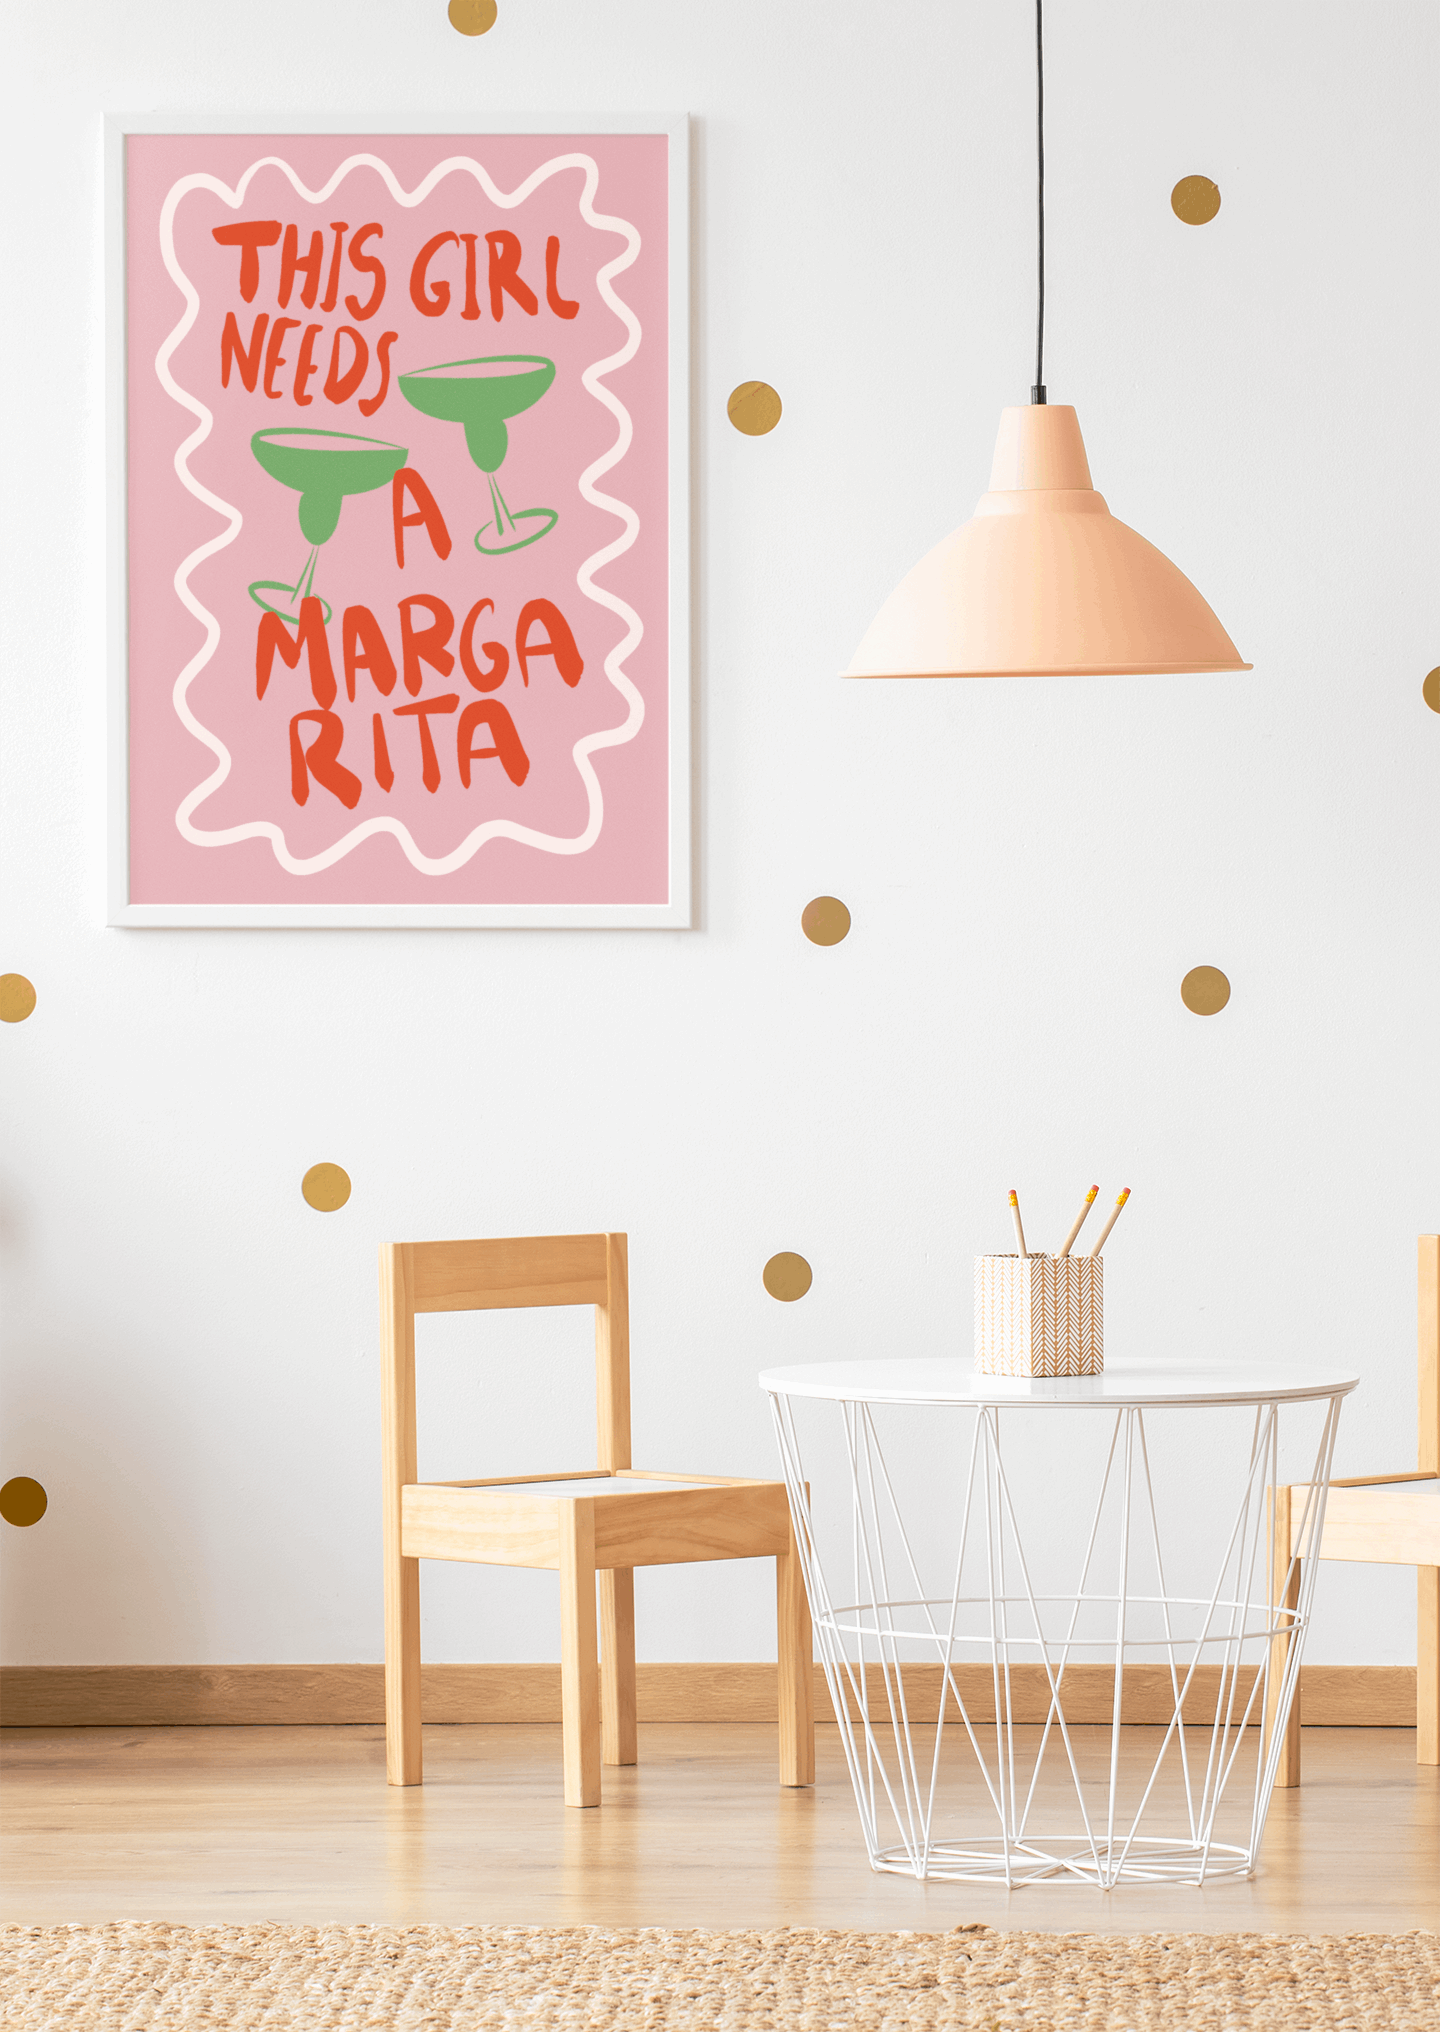 This Girl needs a Margarita - Poster